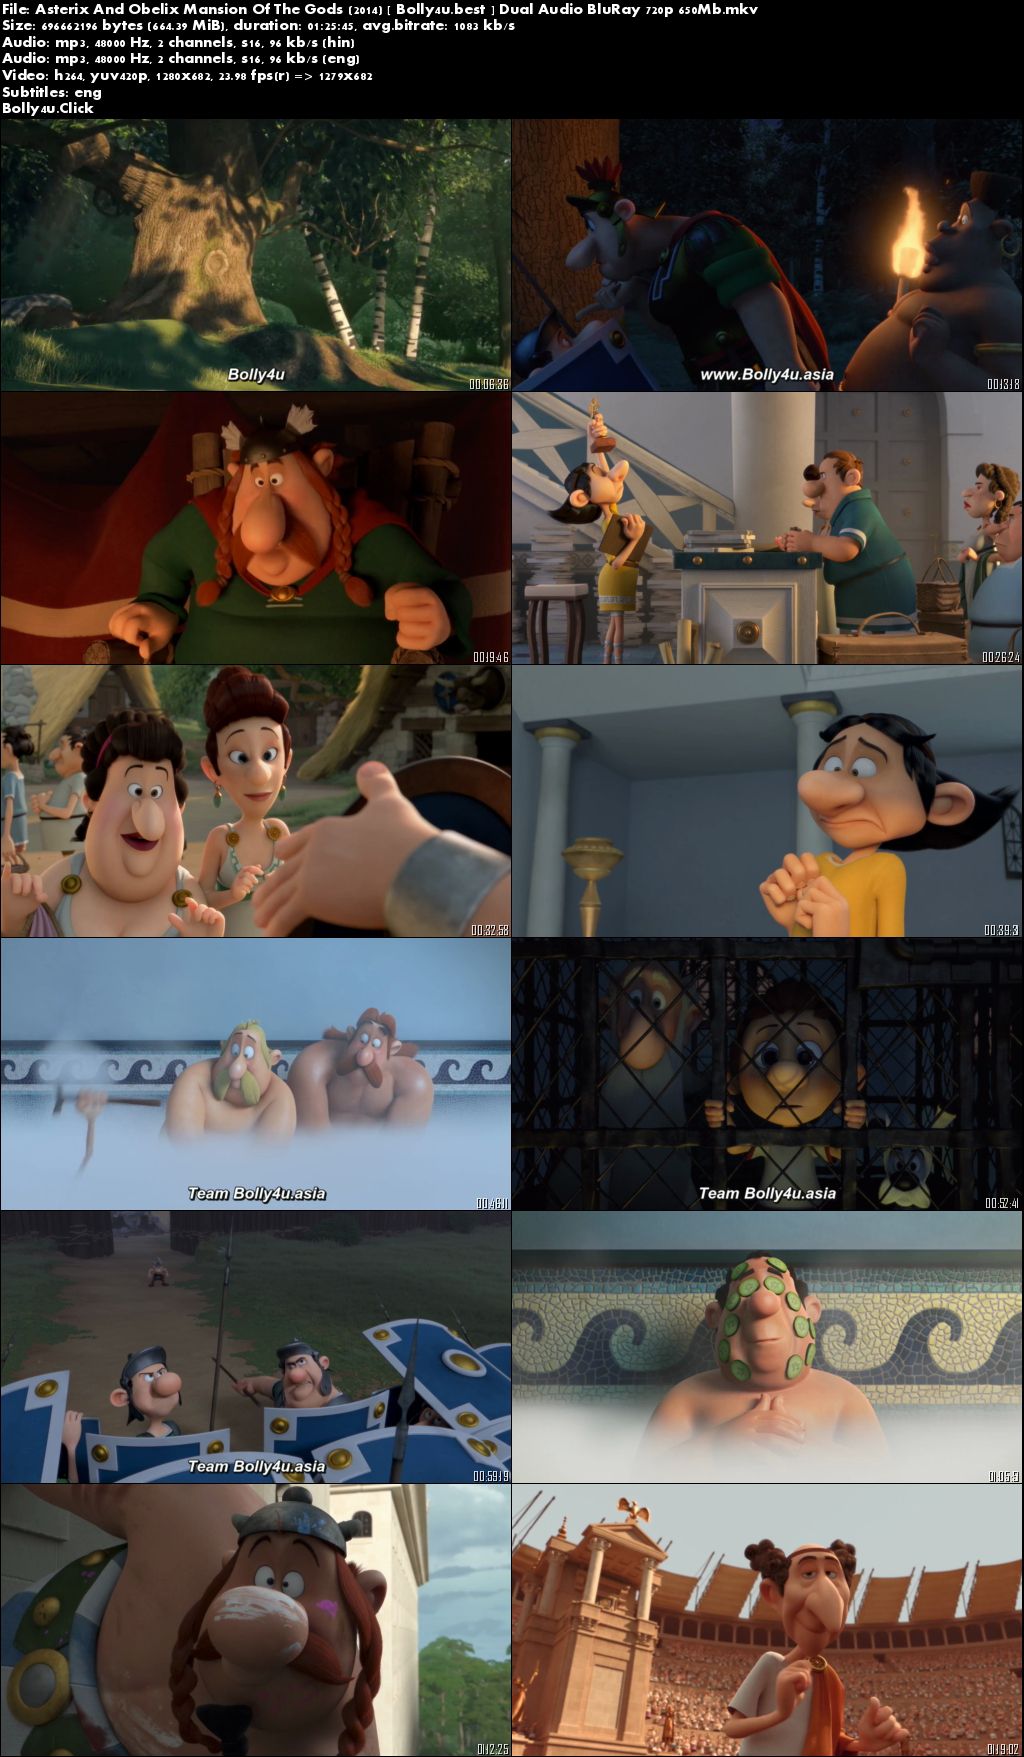 Asterix And Obelix Mansion Of The Gods 2014 BRRip 650Mb Hindi Dual Audio 720p Download